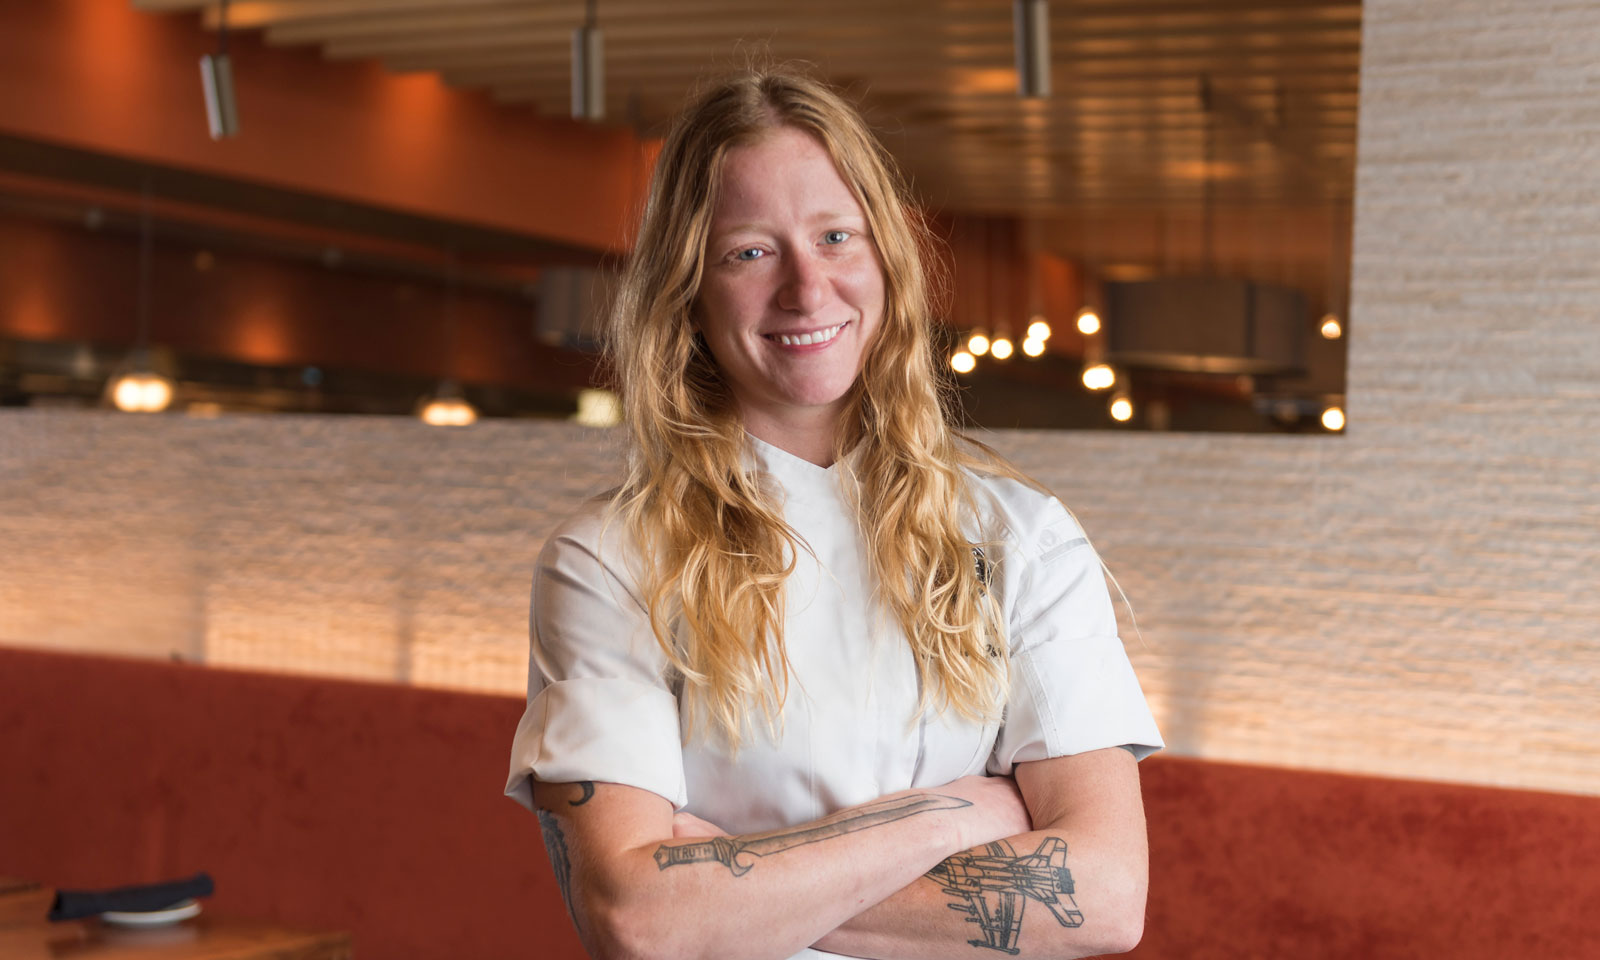 She’s the top chef at Del Frisco’s Grille